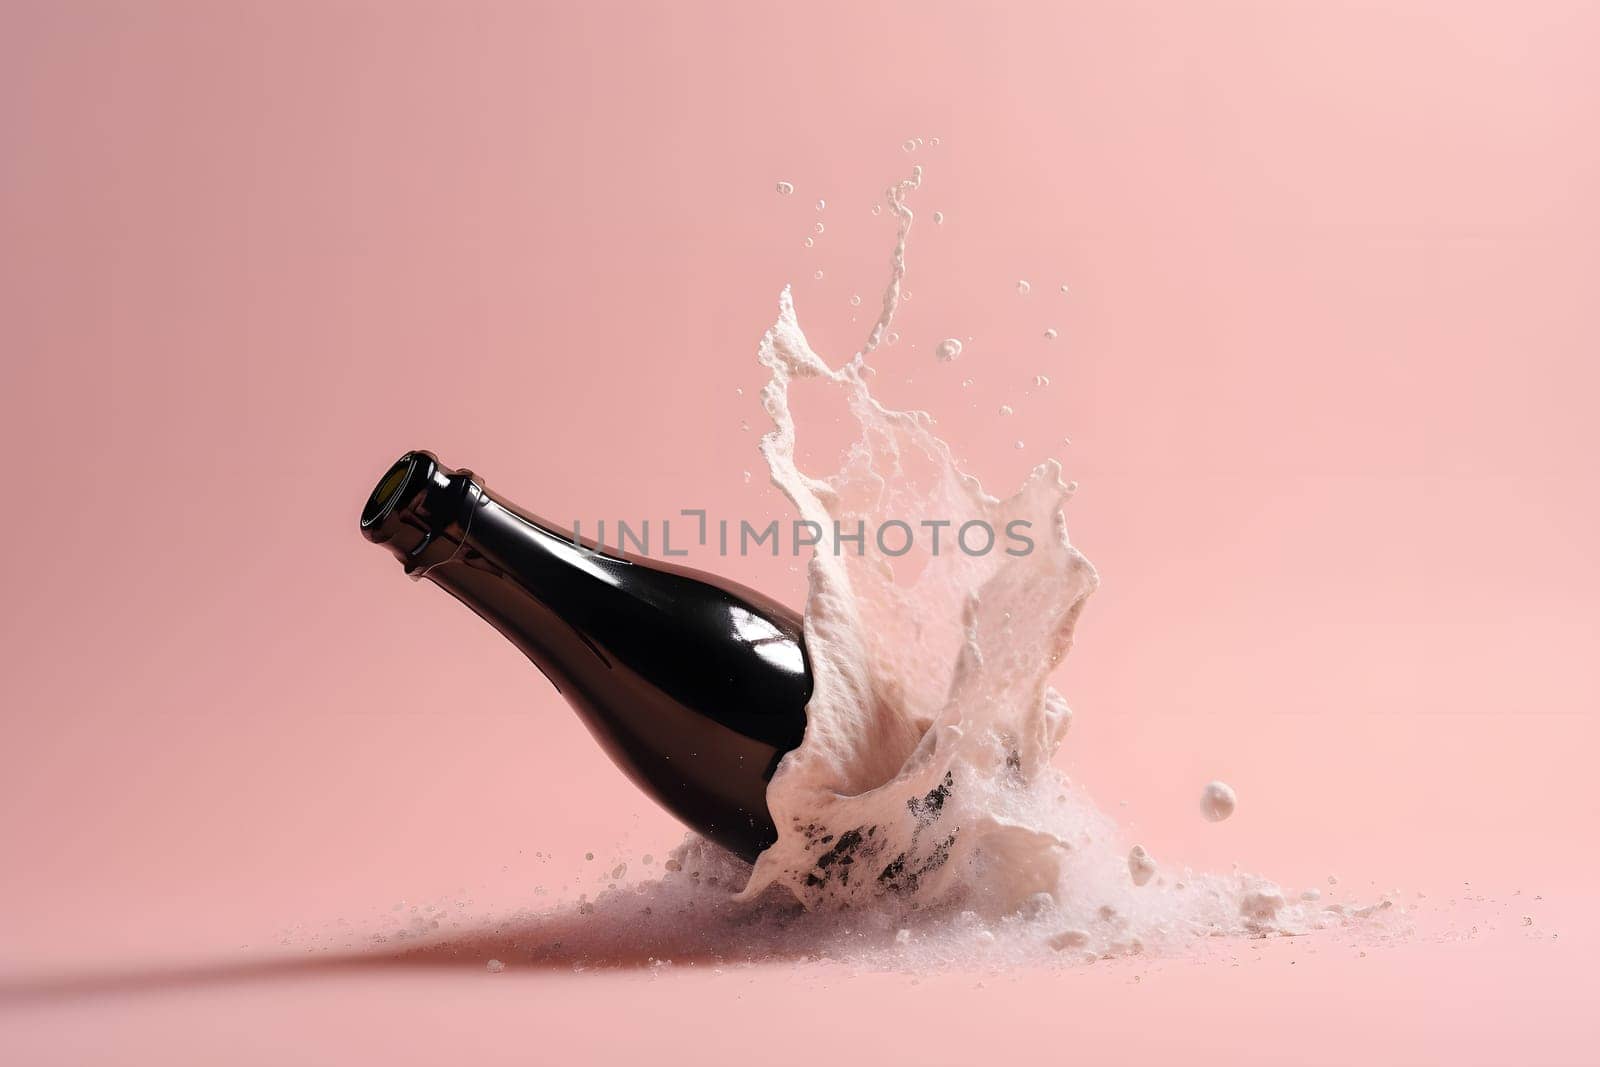 opened bottle of champagne with splashes on pink background, neural network generated photorealistic image by z1b